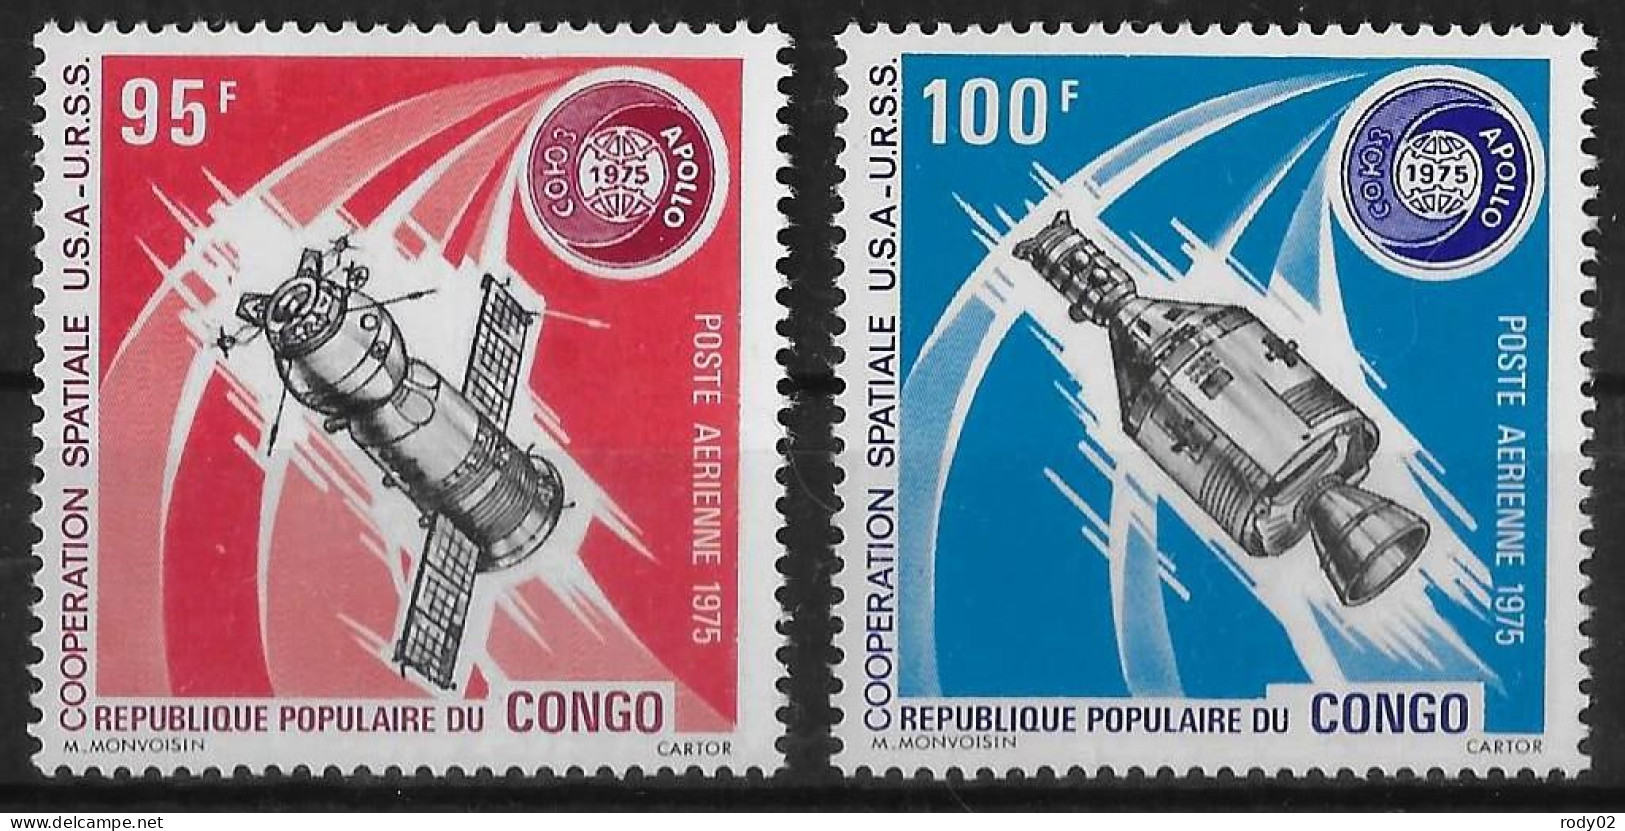 CONGO - ESPACE - COOPERATION SPATIALE USA URSS - PA 208 ET 209 - NEUF** MNH - Africa